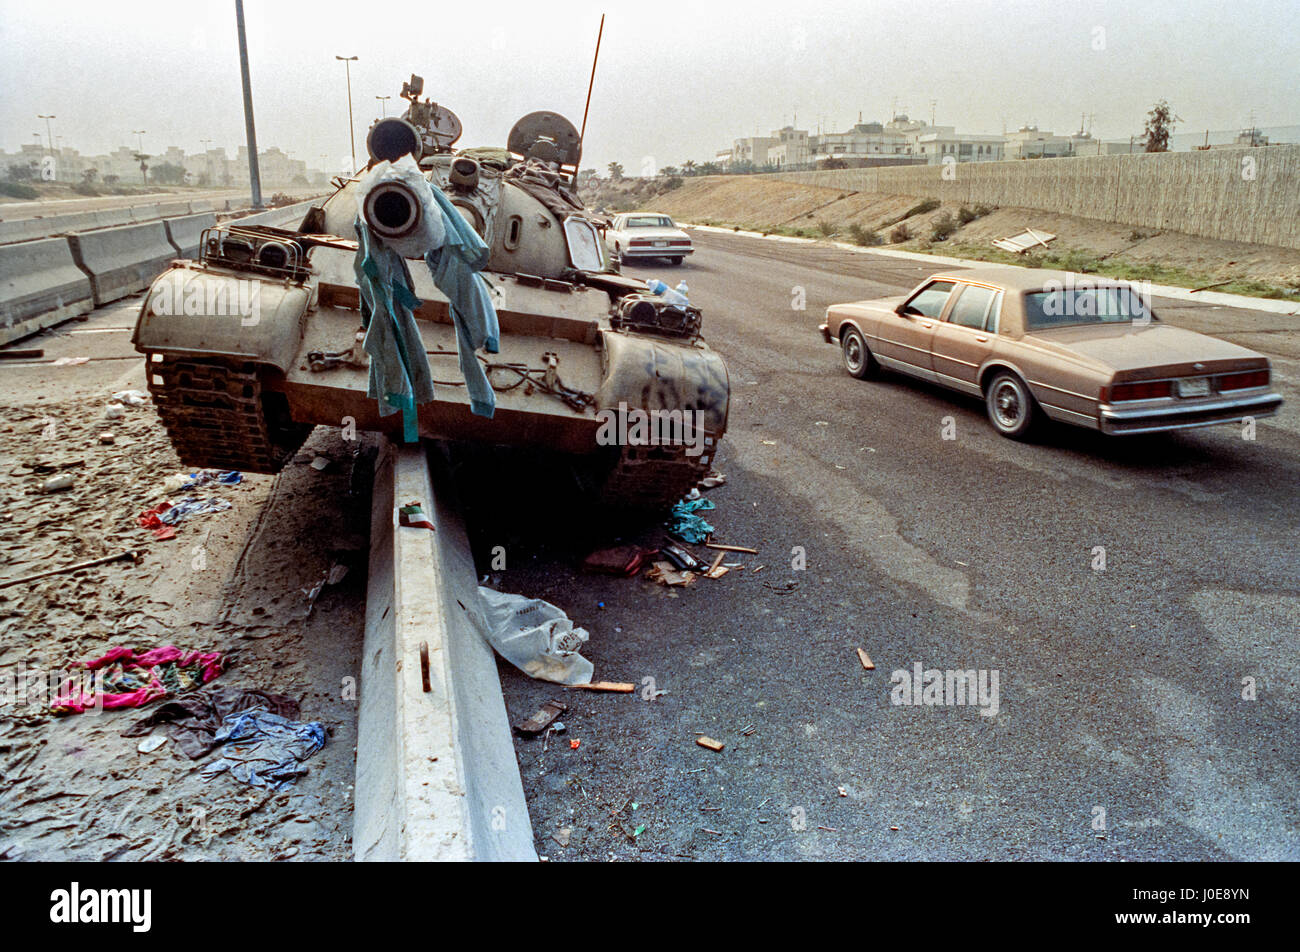 Cars drive past a destroyed Iraqi Army T-72 tank left behind by retreating soldiers following the liberation of Kuwait March 1, 1991 in Kuwait City, Kuwait. After four days of fighting, all Iraqi troops were expelled from Kuwait, ending a nearly seven-month occupation of Kuwait by Iraq. Stock Photo